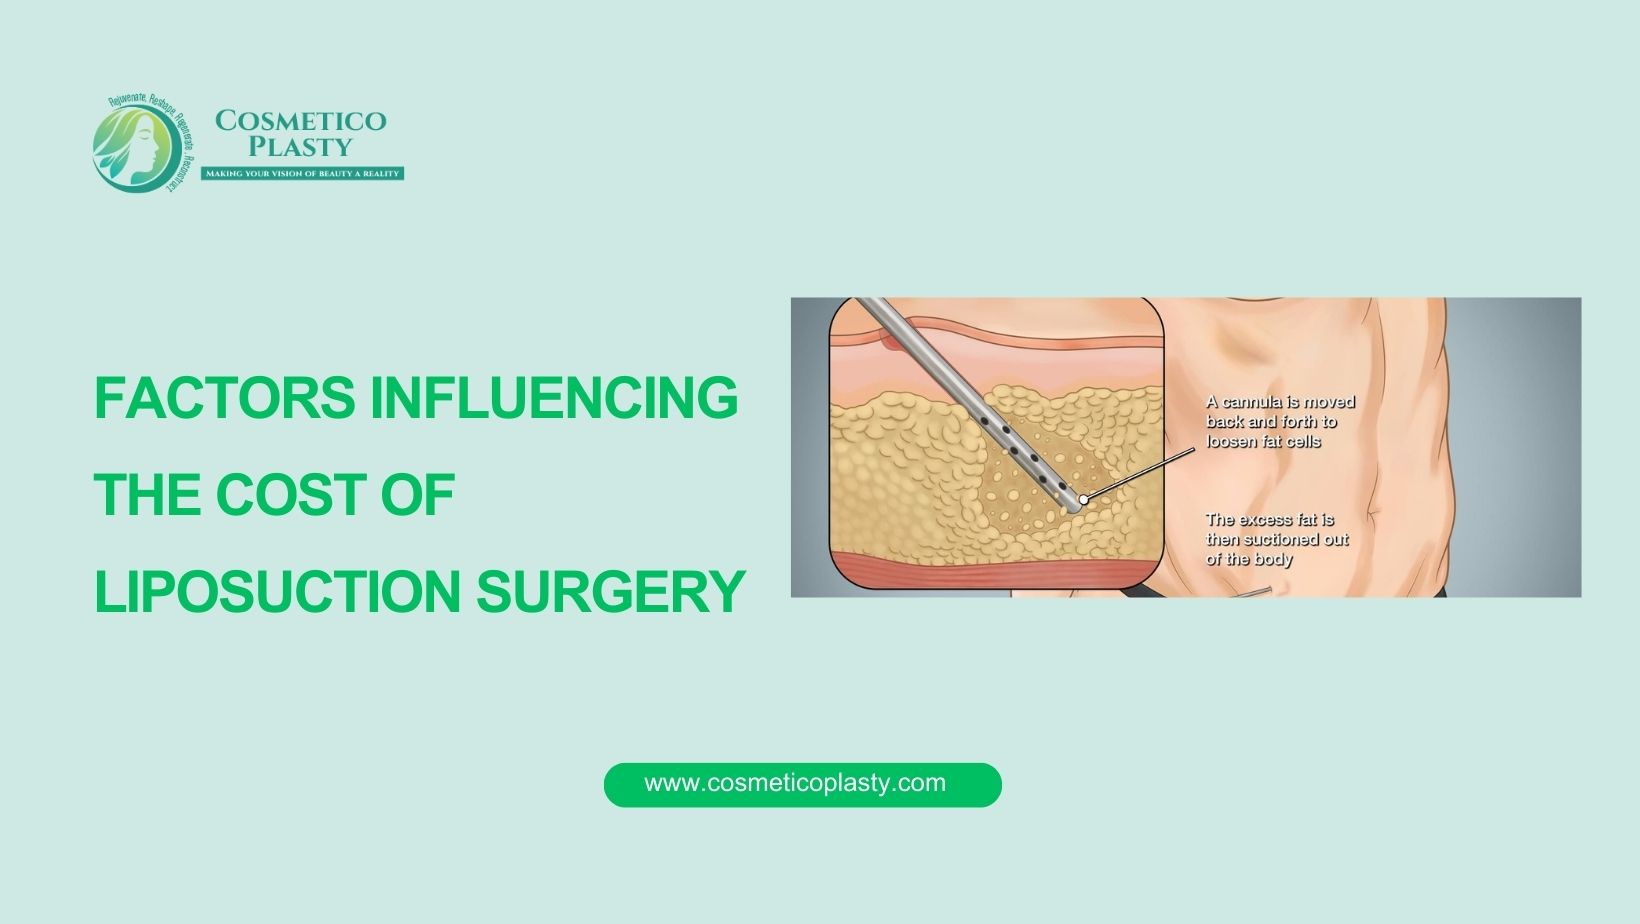 Factors influencing the cost of liposuction surgery